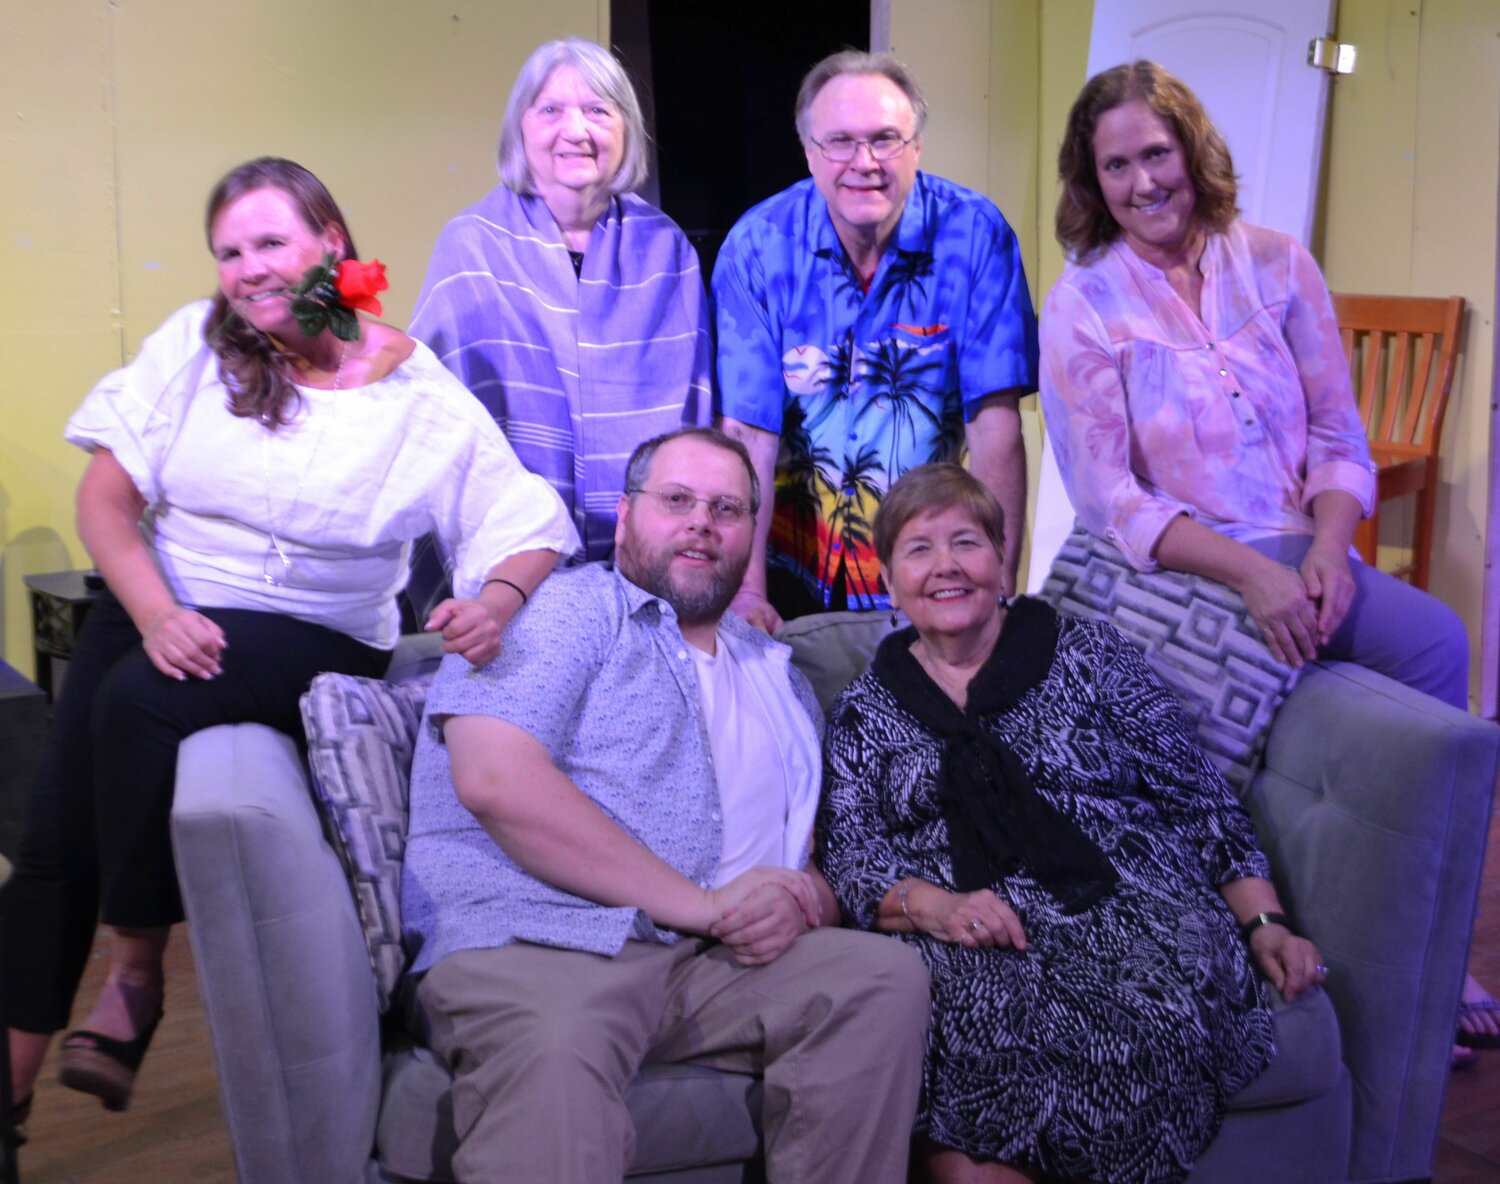 Front row from left to right: Austin Harn and DeAnne Sawyer. Back row from left to right: Richelle Battams, Janice Groves, Michael Shough, and Nancy Stuber.